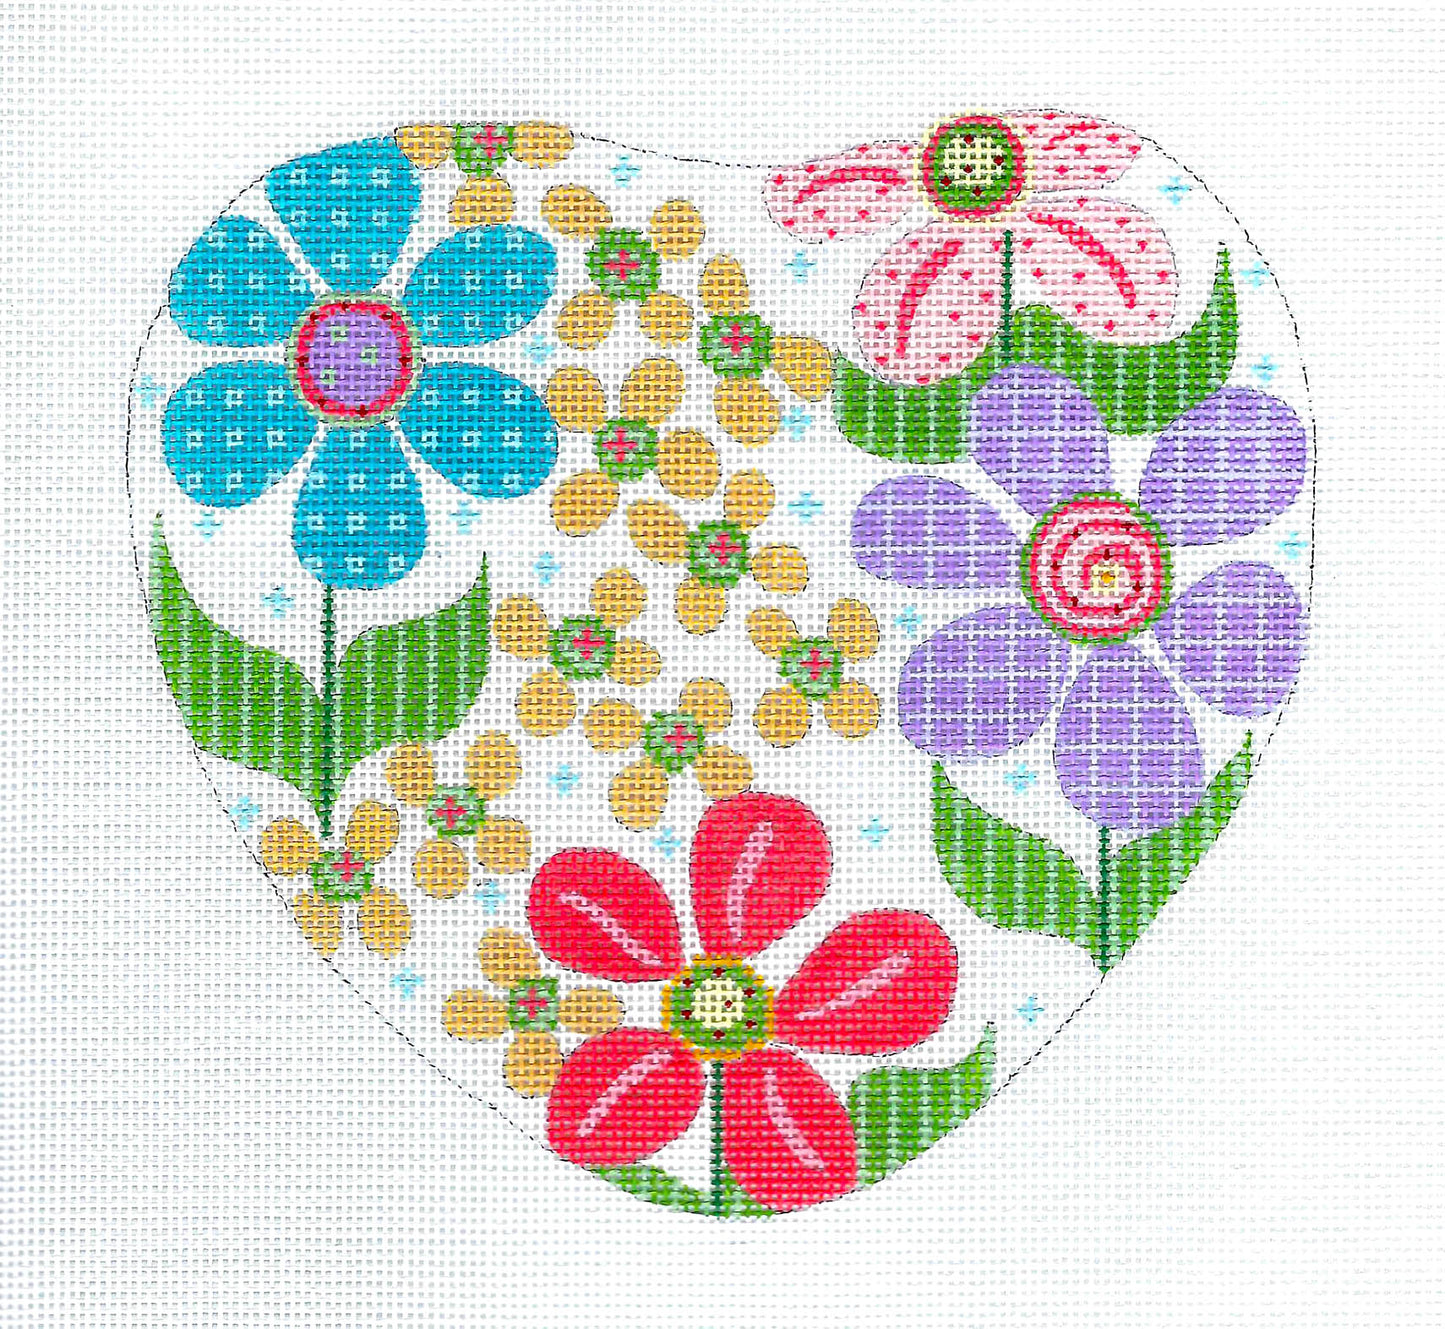 Heart ~ FLORAL HEART & STITCH GUIDE handpainted Needlepoint Canvas by CH Designs from Danji